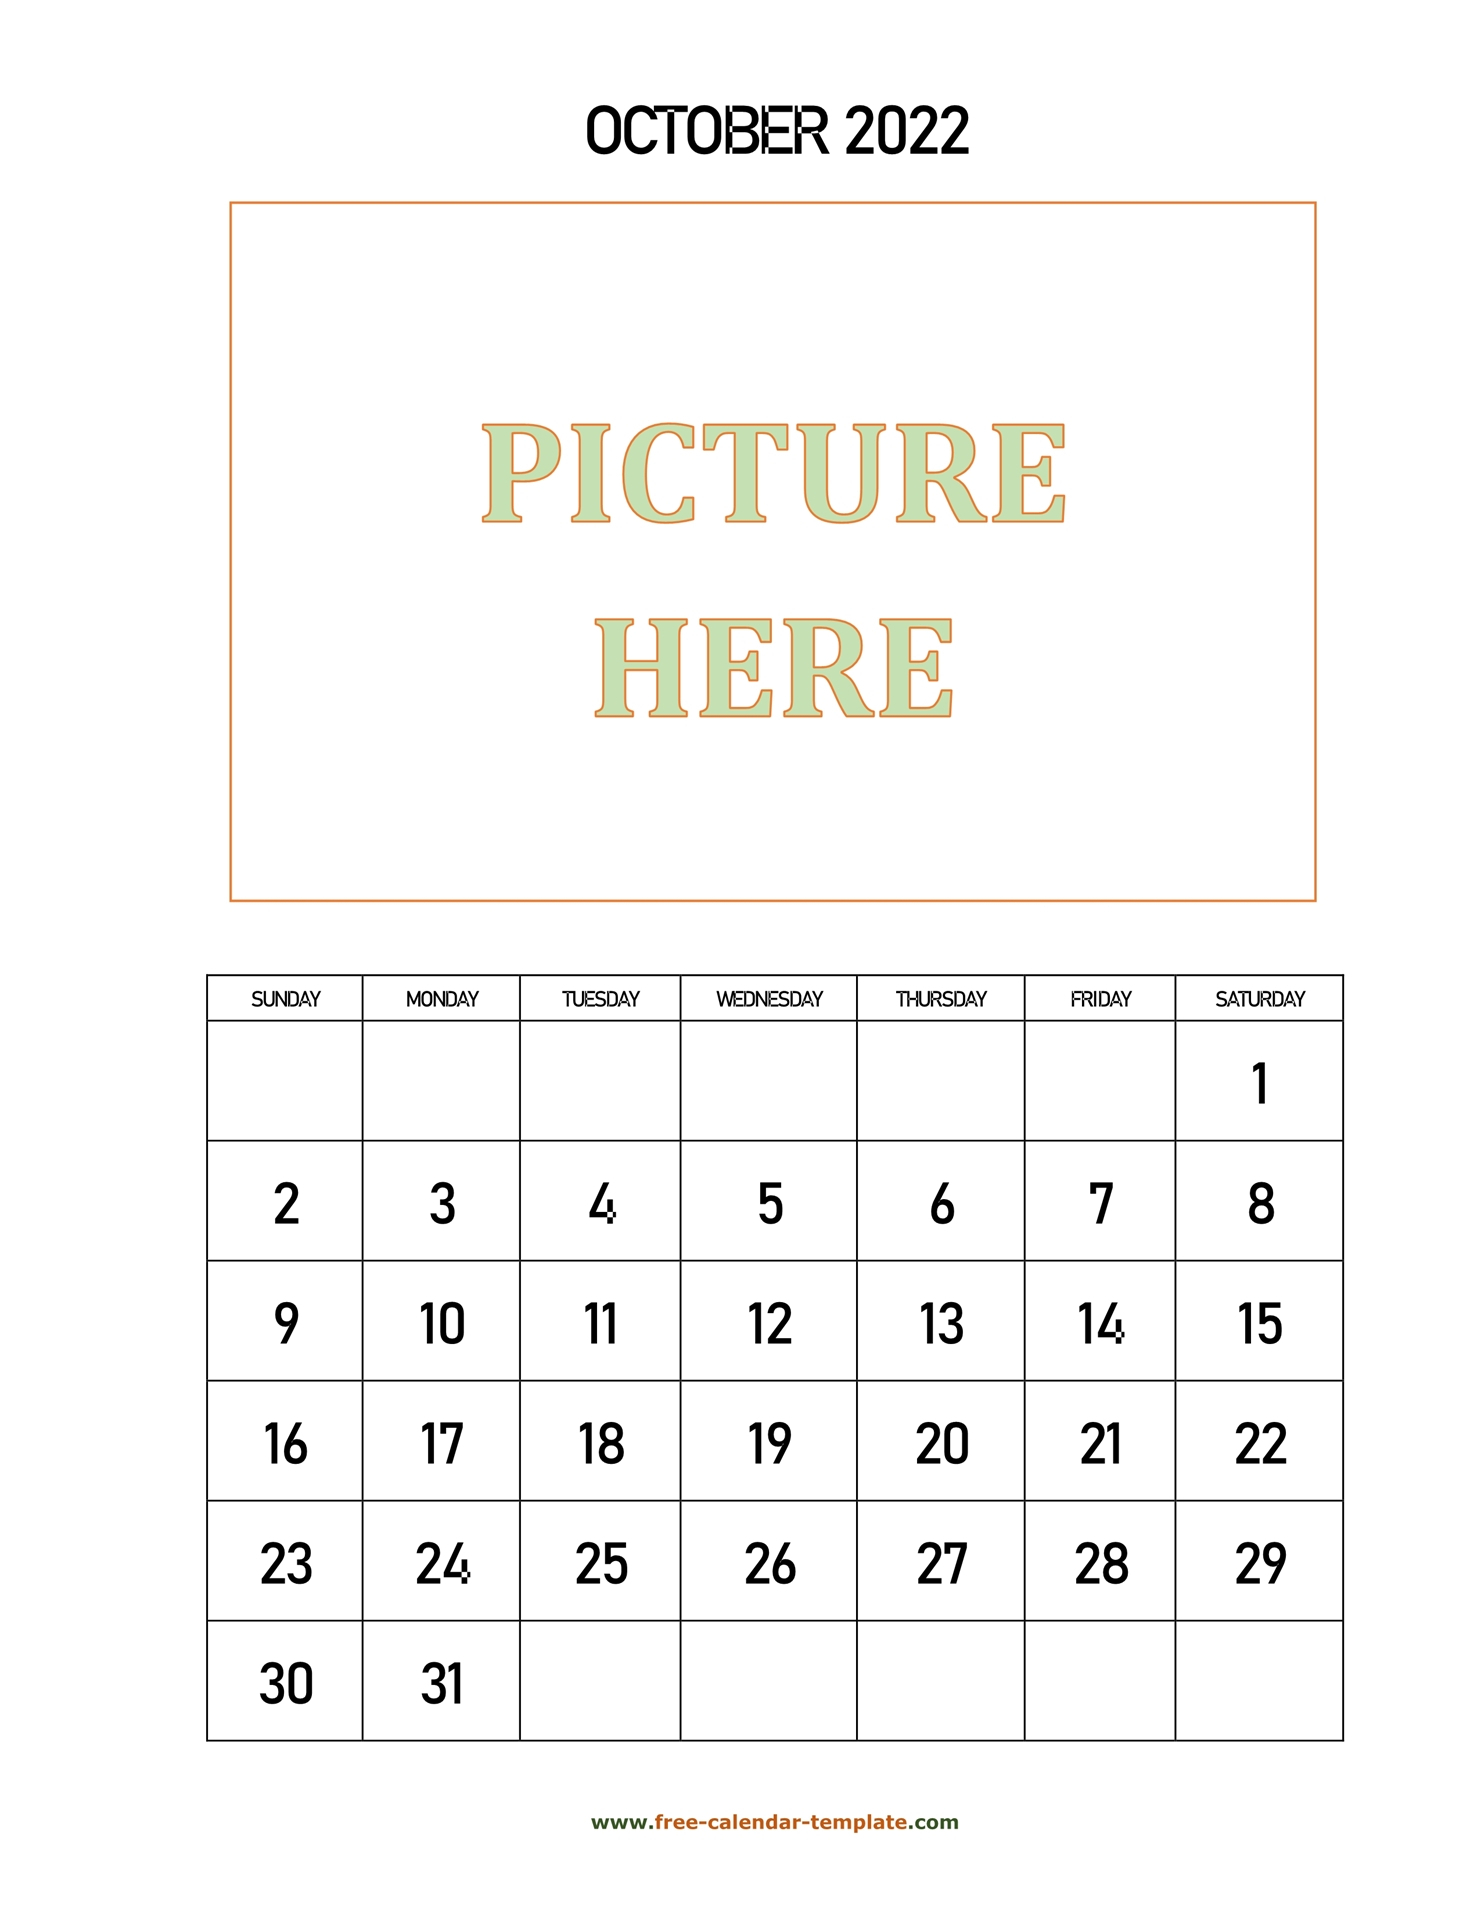 October Printable 2022 Calendar, Space For Add Picture